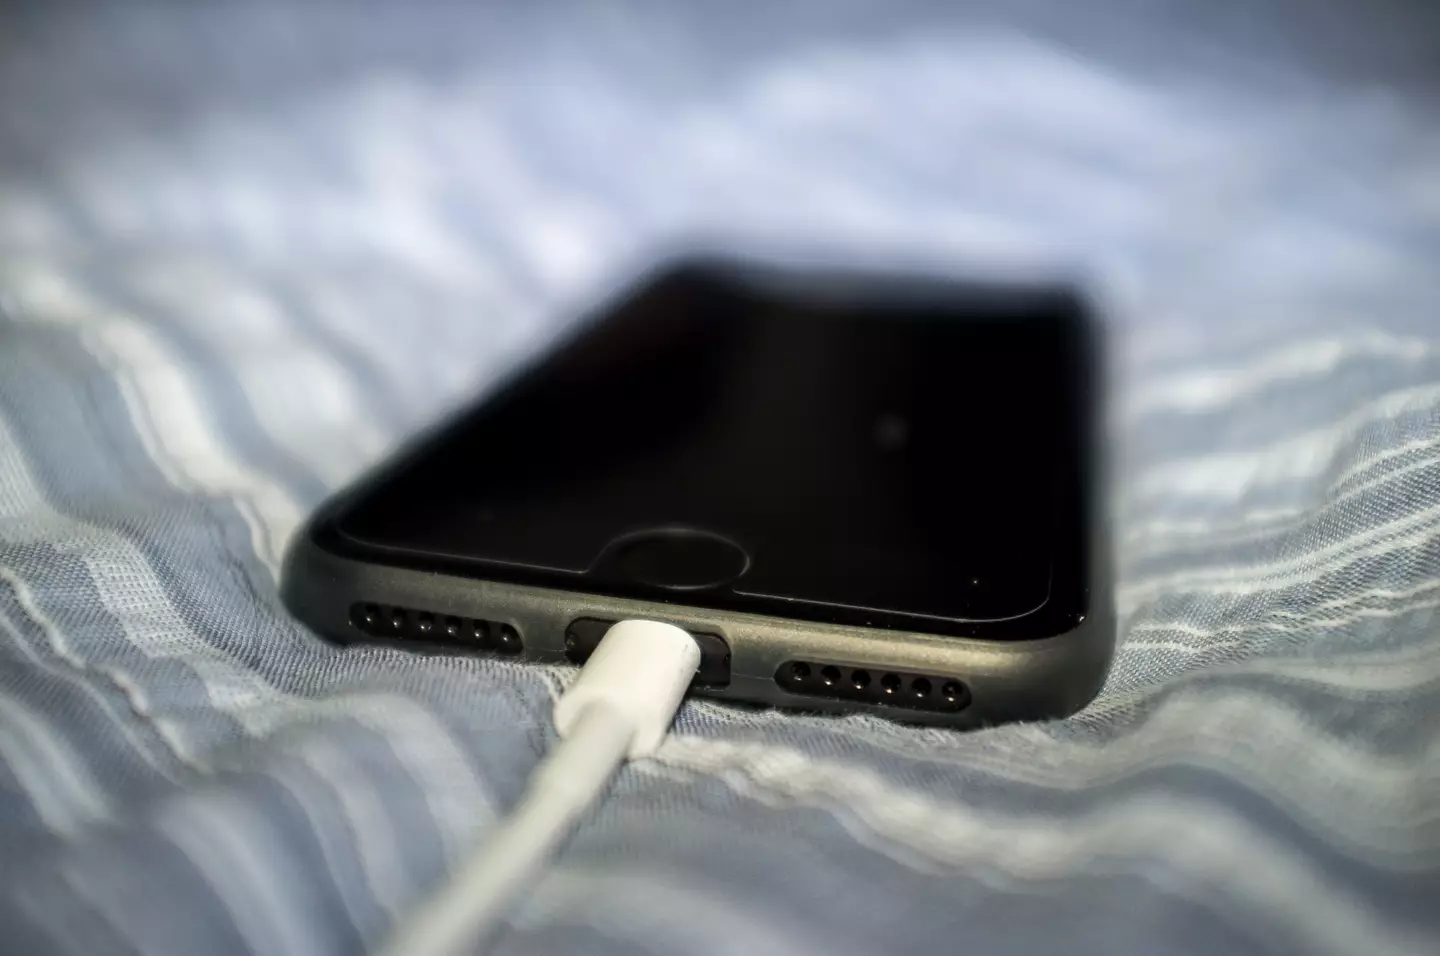 Apple says 'when possible' it is beneficial to 'unplug your iPhone after it has fully charged'.